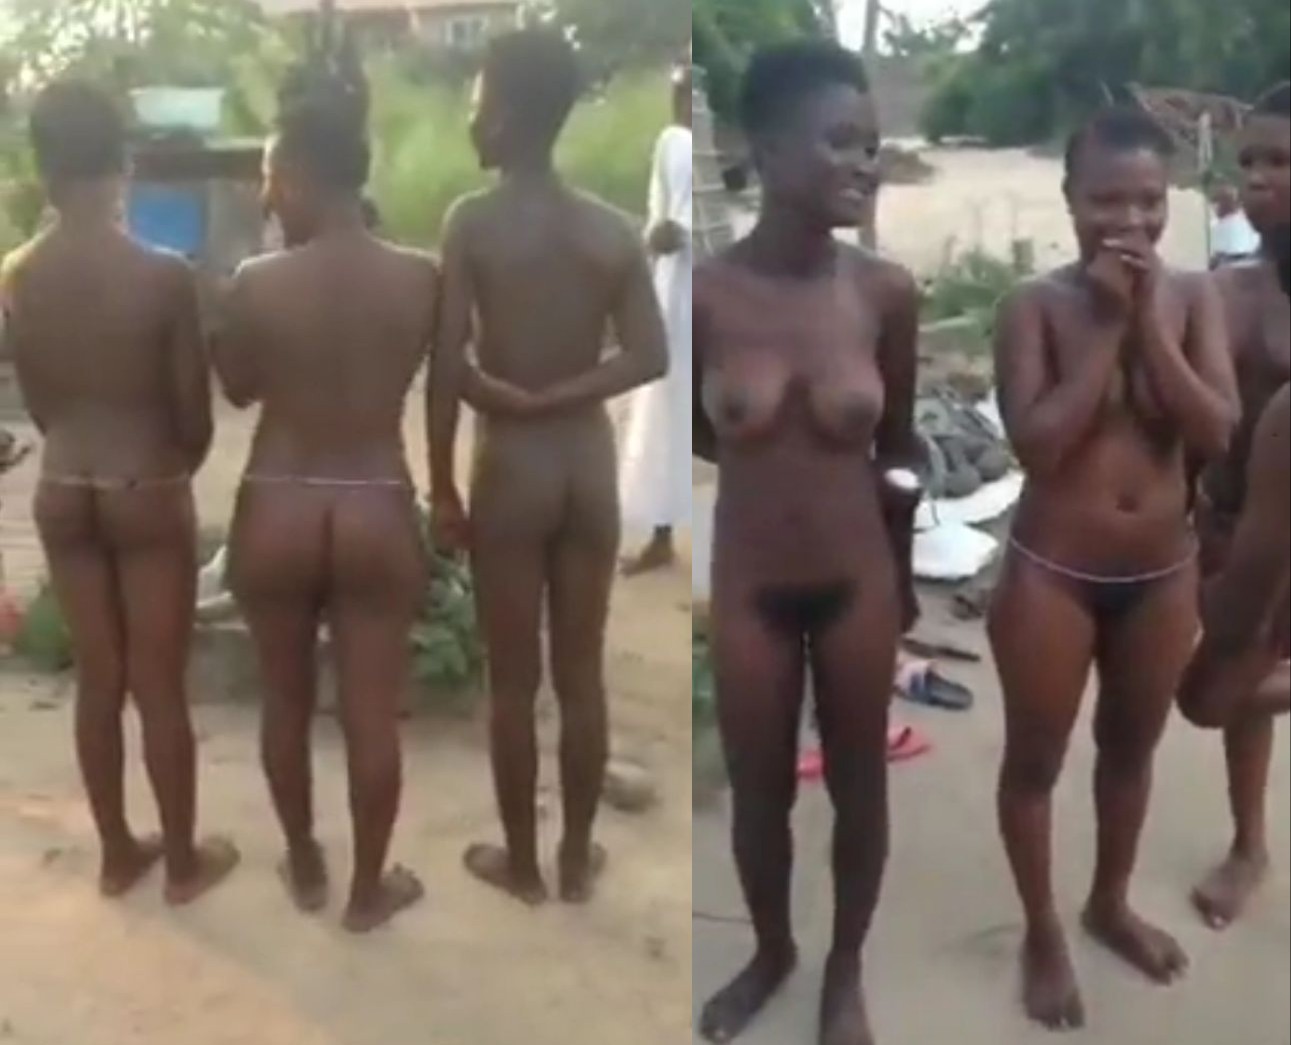 3 Naked African School Girls With Bushy Pussy Showing Their Breasts And Ass To Men In Public For Sex Work (18+)